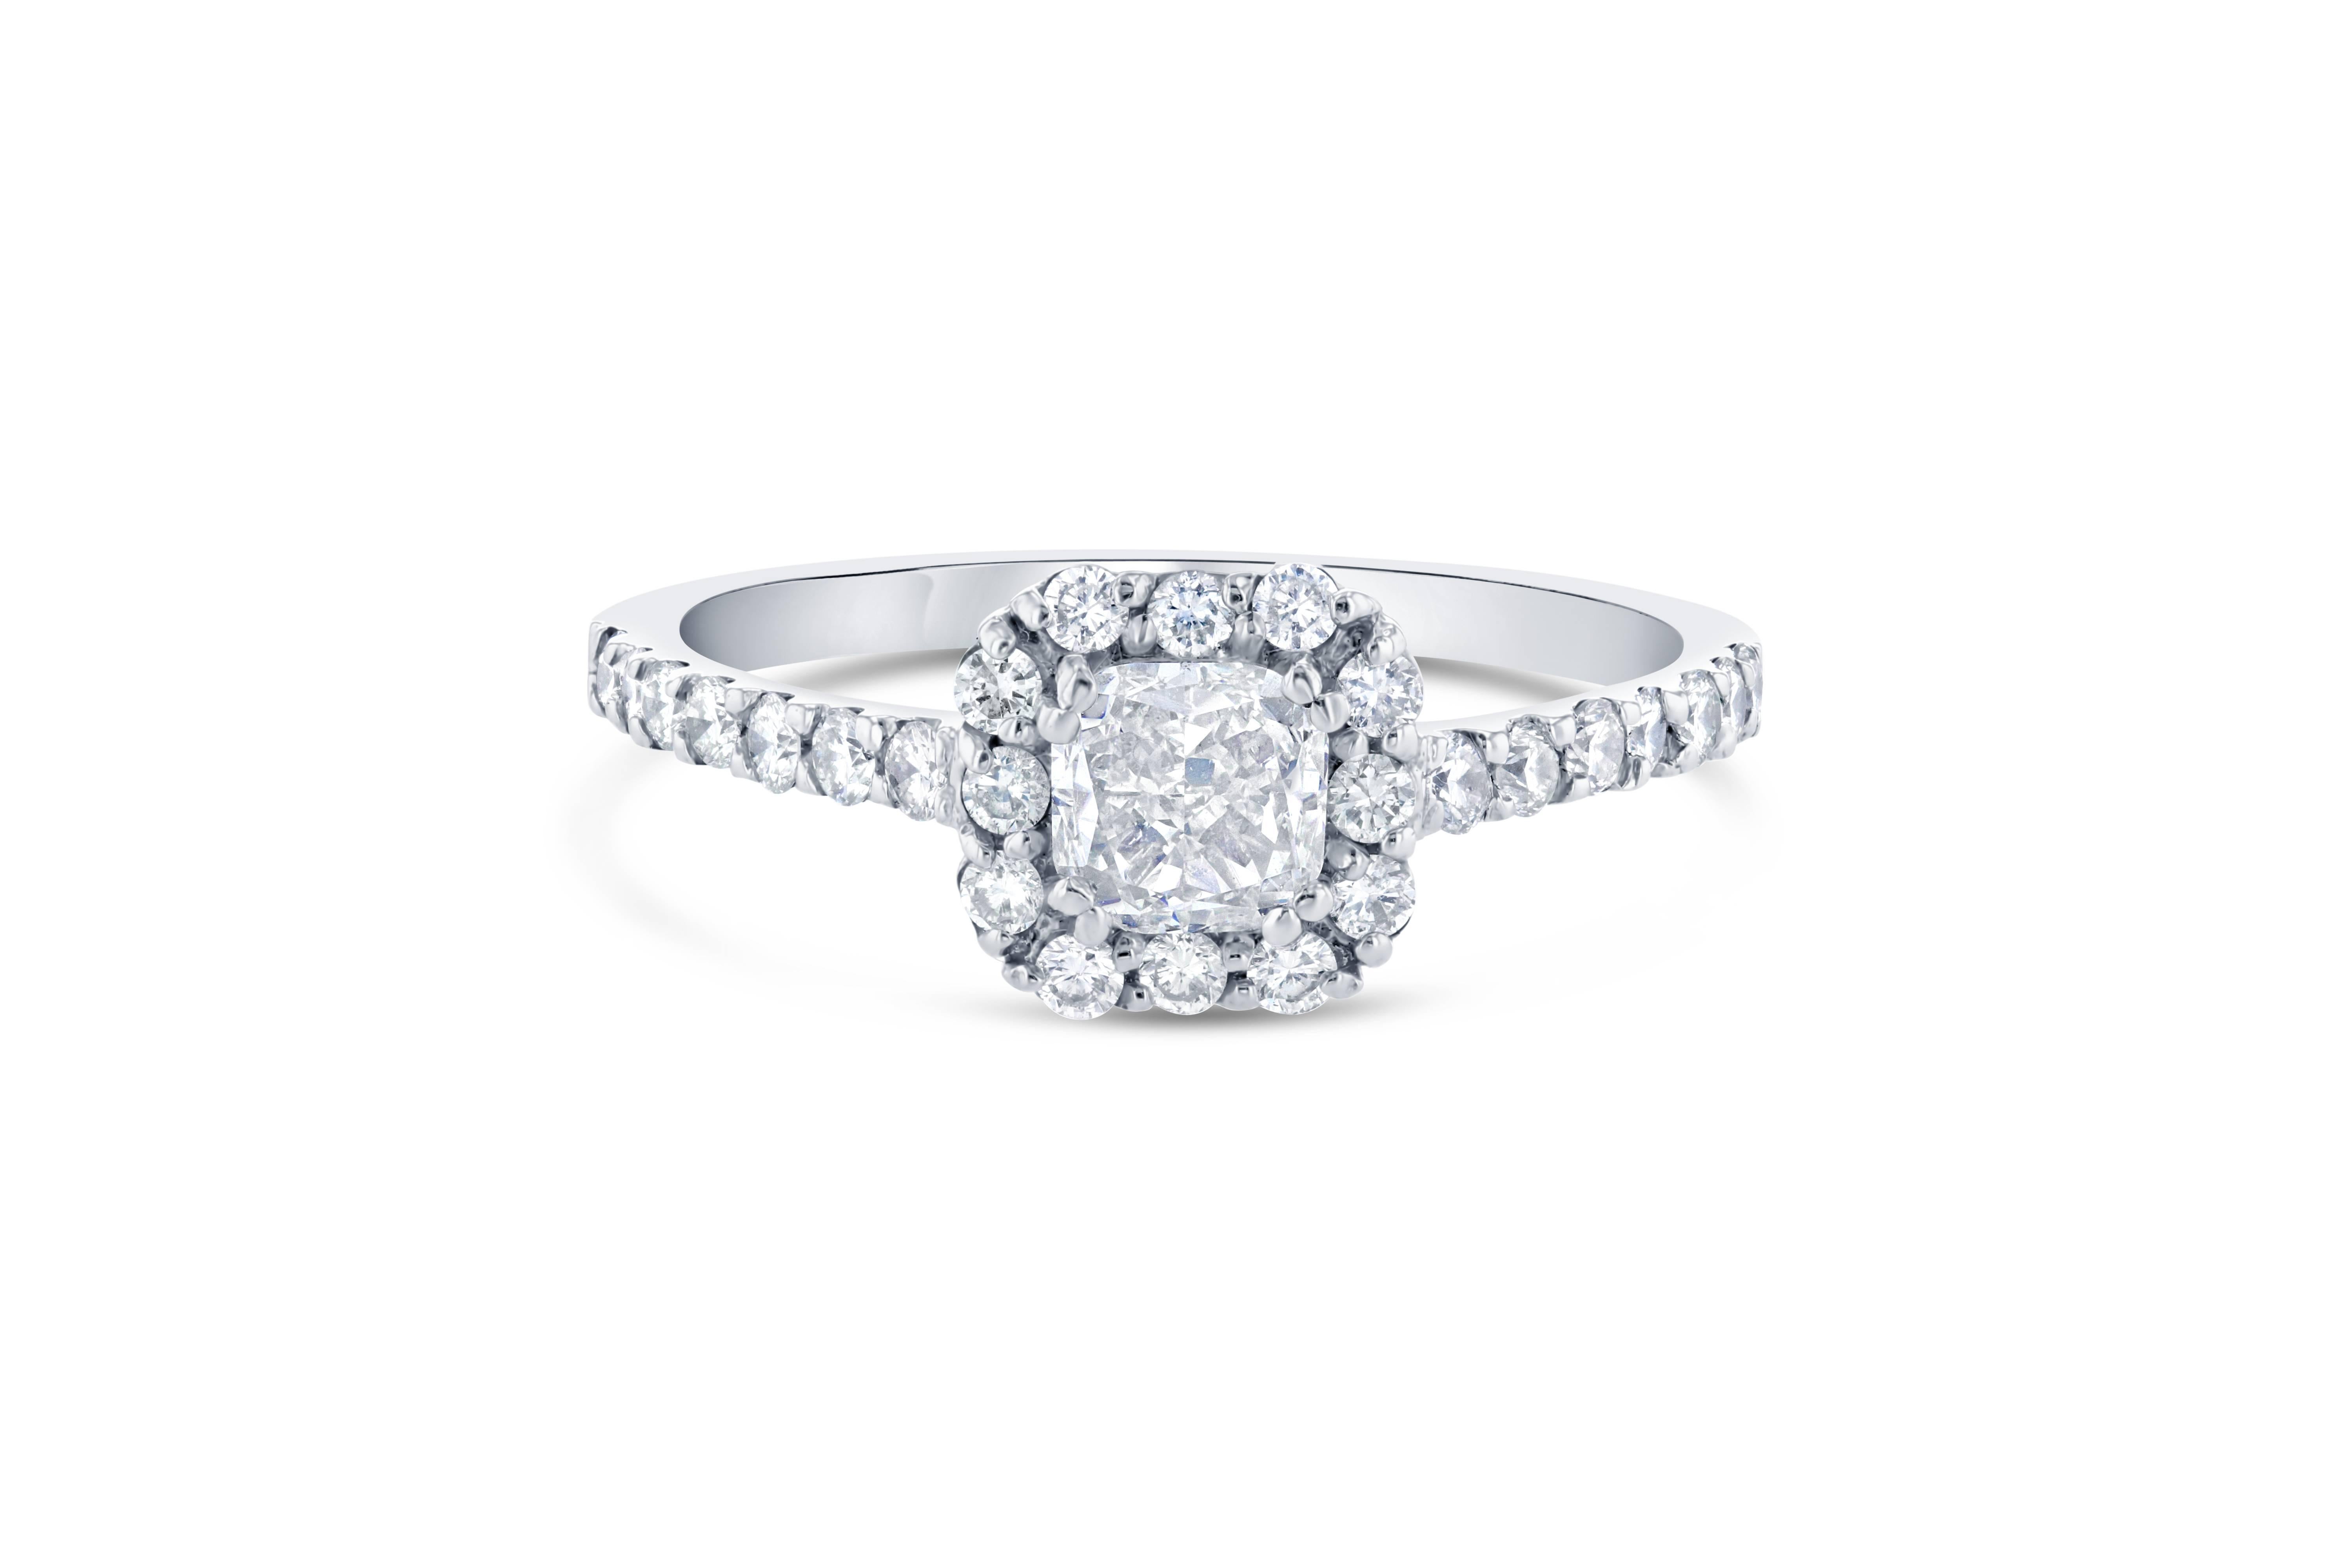 Delicate Cushion Cut Diamond Ring!

The center Cushion Cut Diamond is 0.65 Carats with a halo of 26 Round Cut Diamonds that weighs 0.36 Carats. The total carat weight of the ring is 1.01 Carats.

It is set in 14K White Gold and is 2.2 grams. The